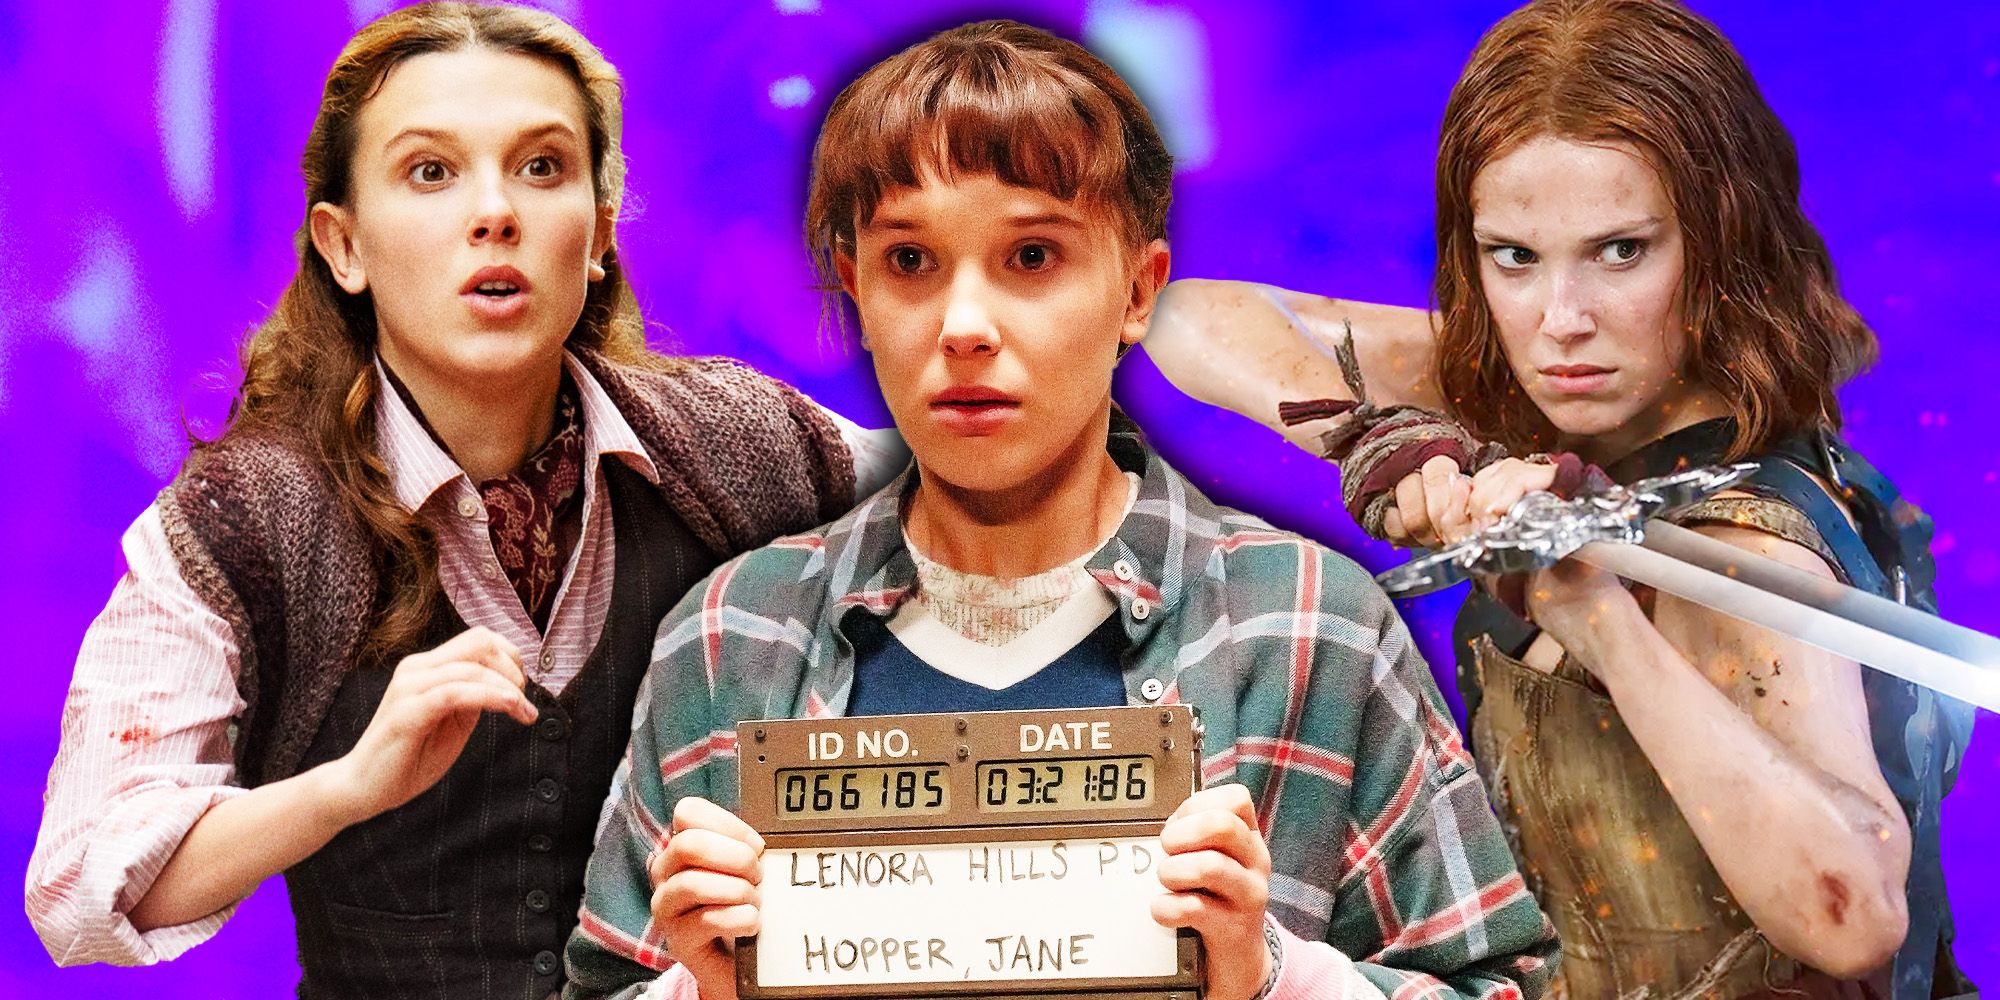 A custom image featuring Millie Bobby Brown in Stranger Things season 4, Enola Holmes 2, and Damsel